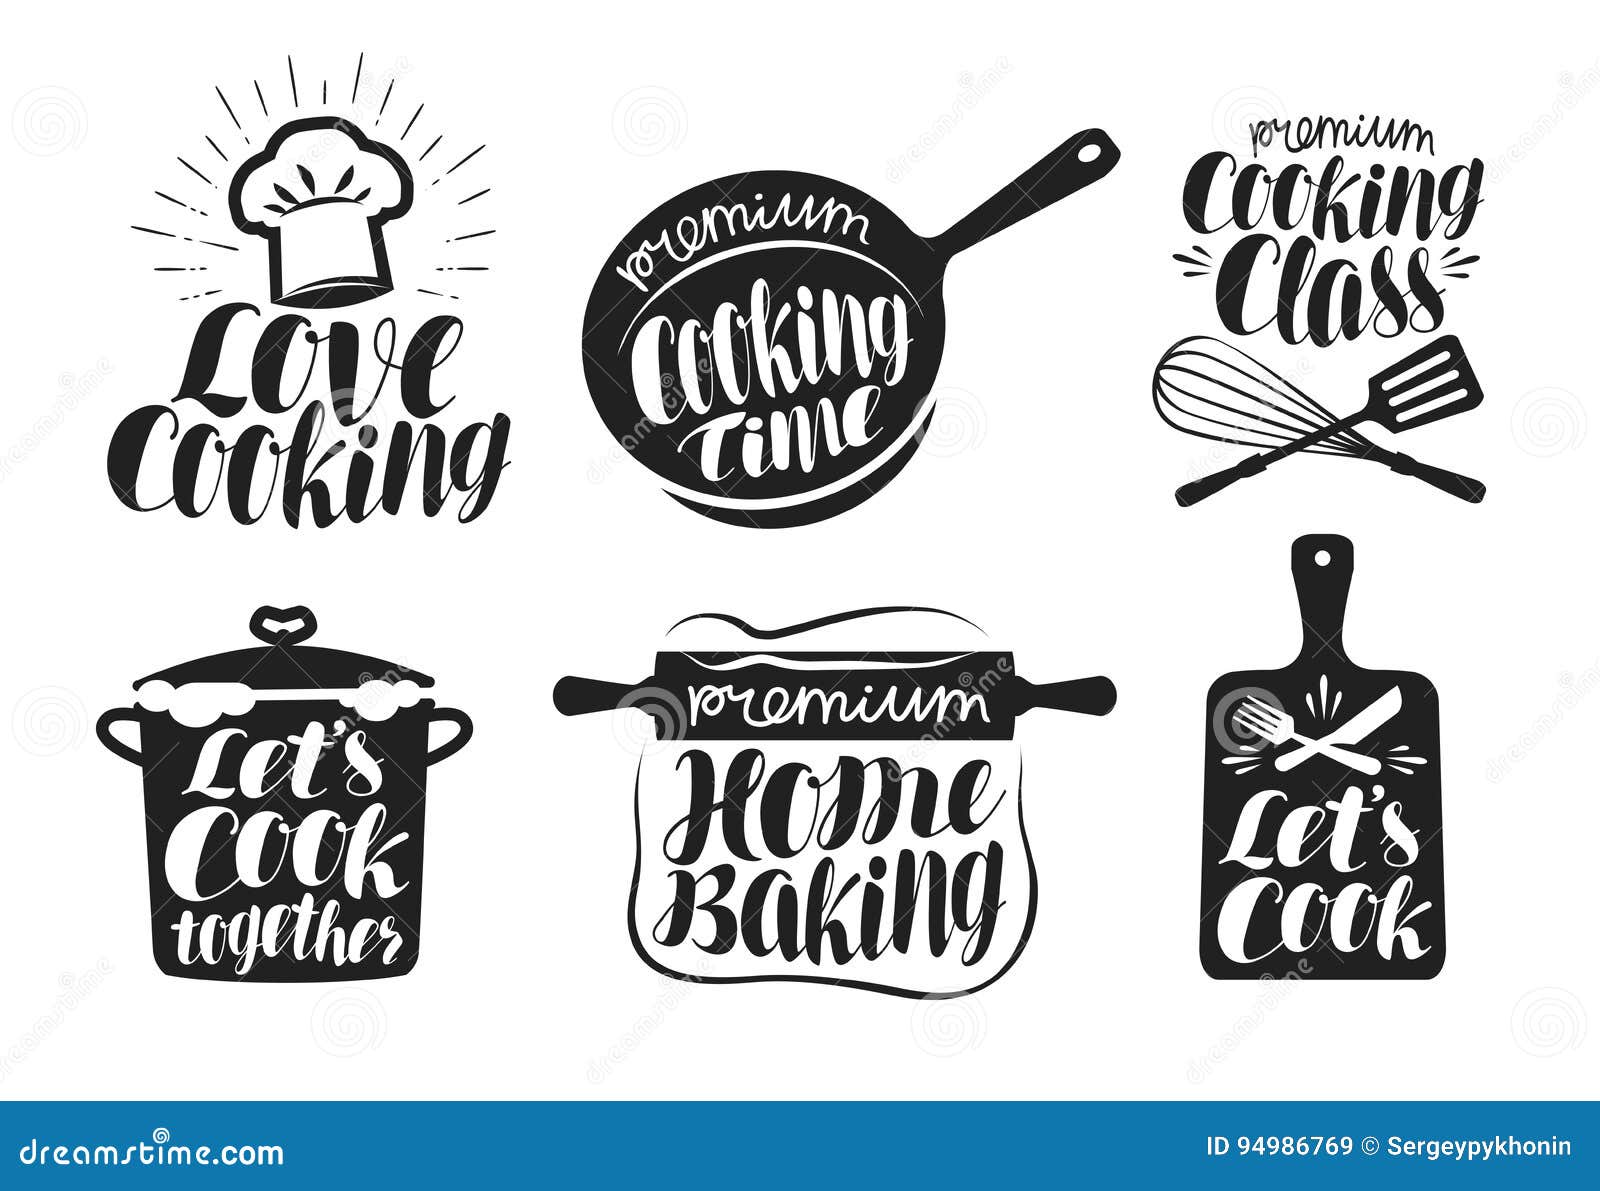 cooking label set. cook, food, eat, home baking icon or logo. lettering, calligraphy  